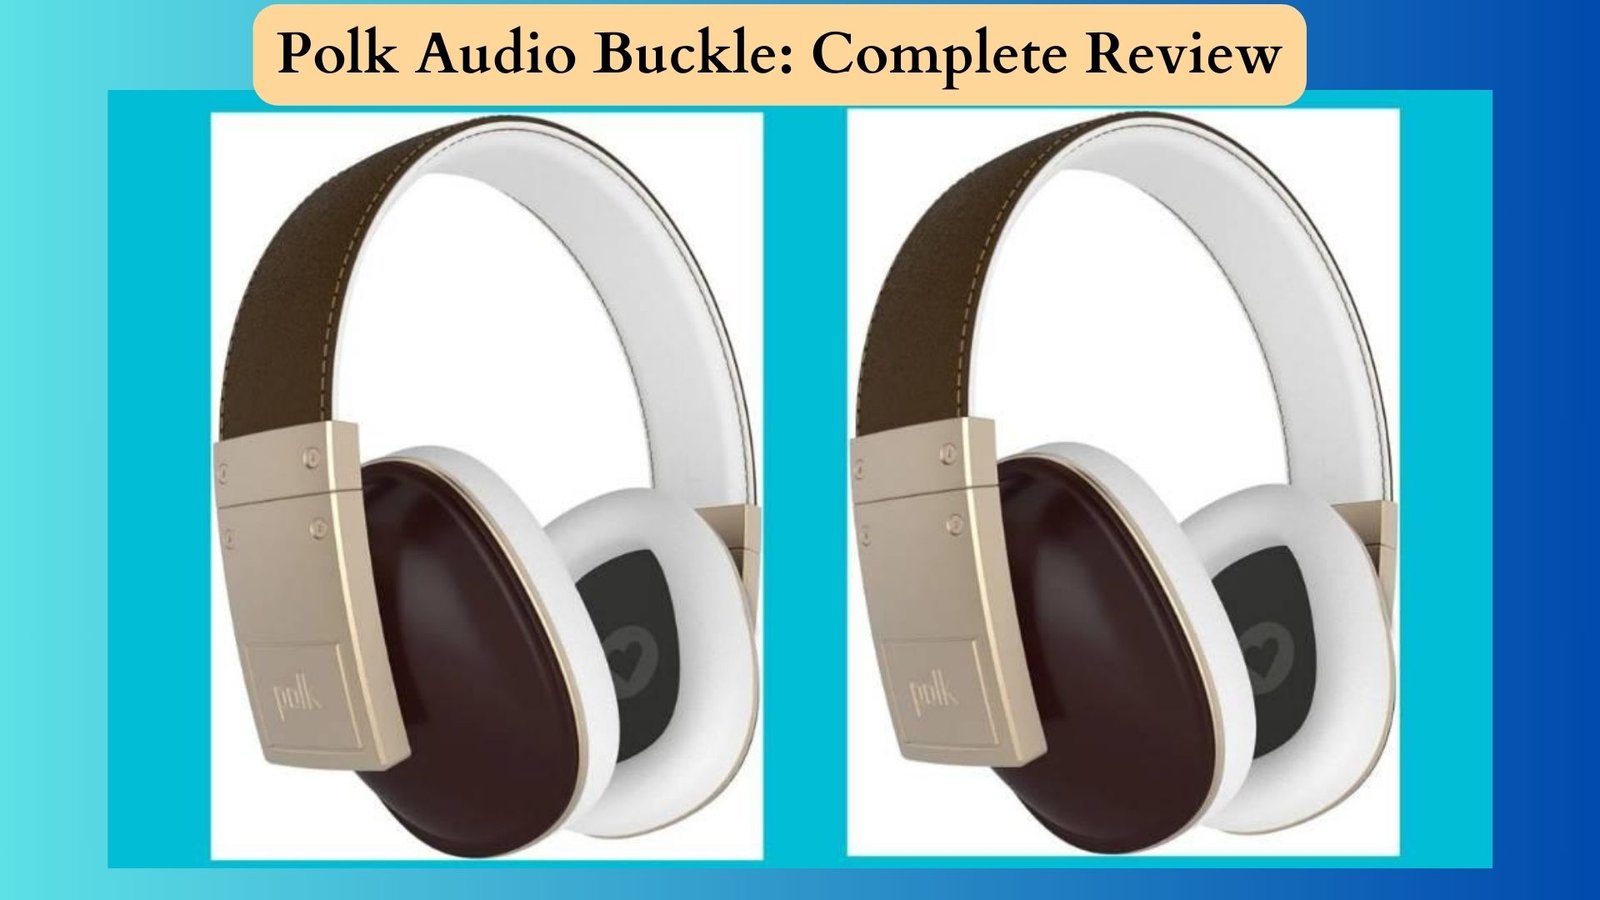 Polk Audio Buckle Complete Review, Specs, Key Features, Pros & Cons